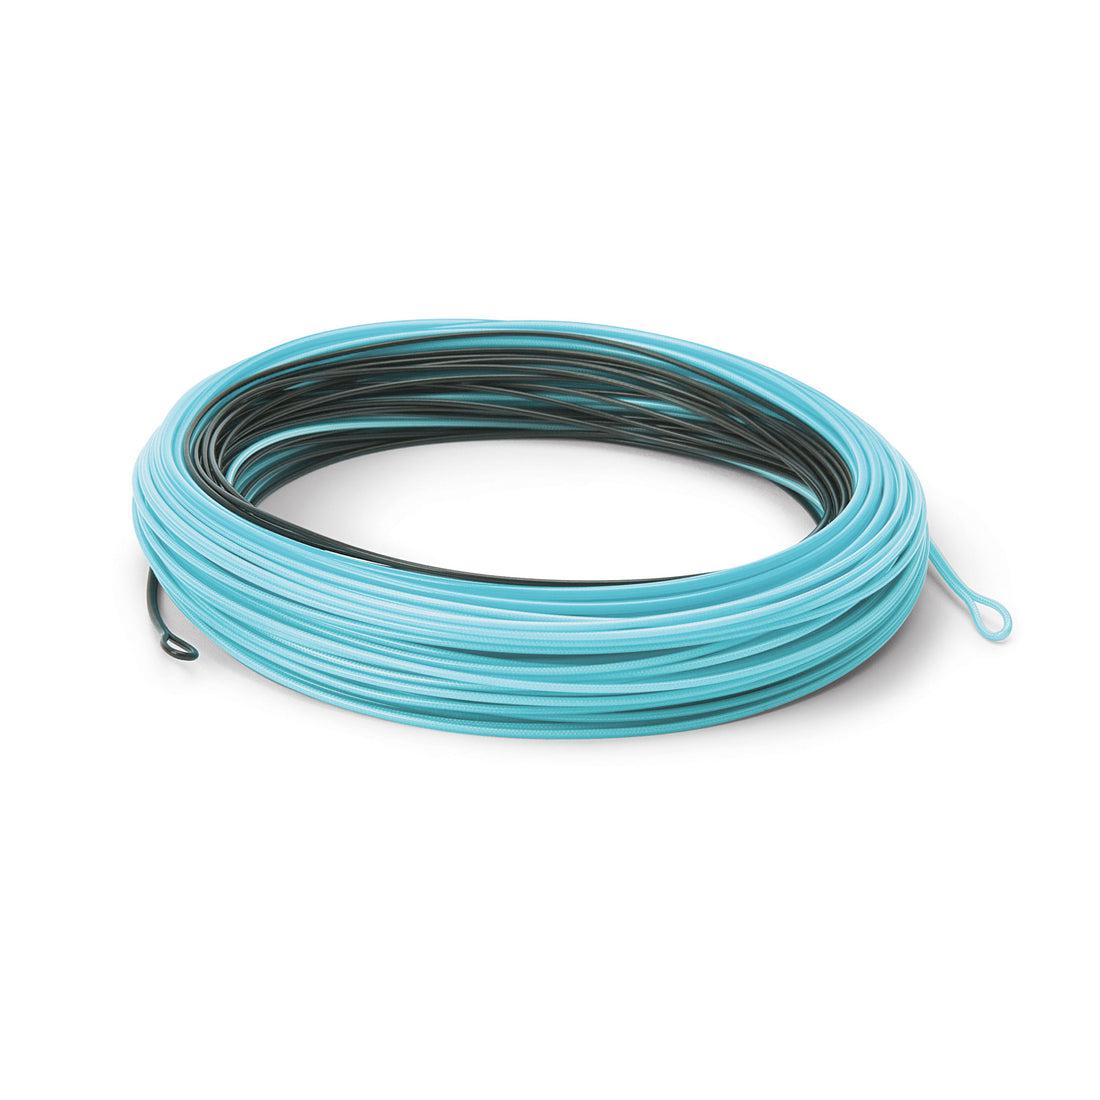 https://cdn.shopify.com/s/files/1/0601/3206/5515/products/cortland-compact-sink-type-9-fly-line-fly_lines-2_1100x.jpg?v=1681862158